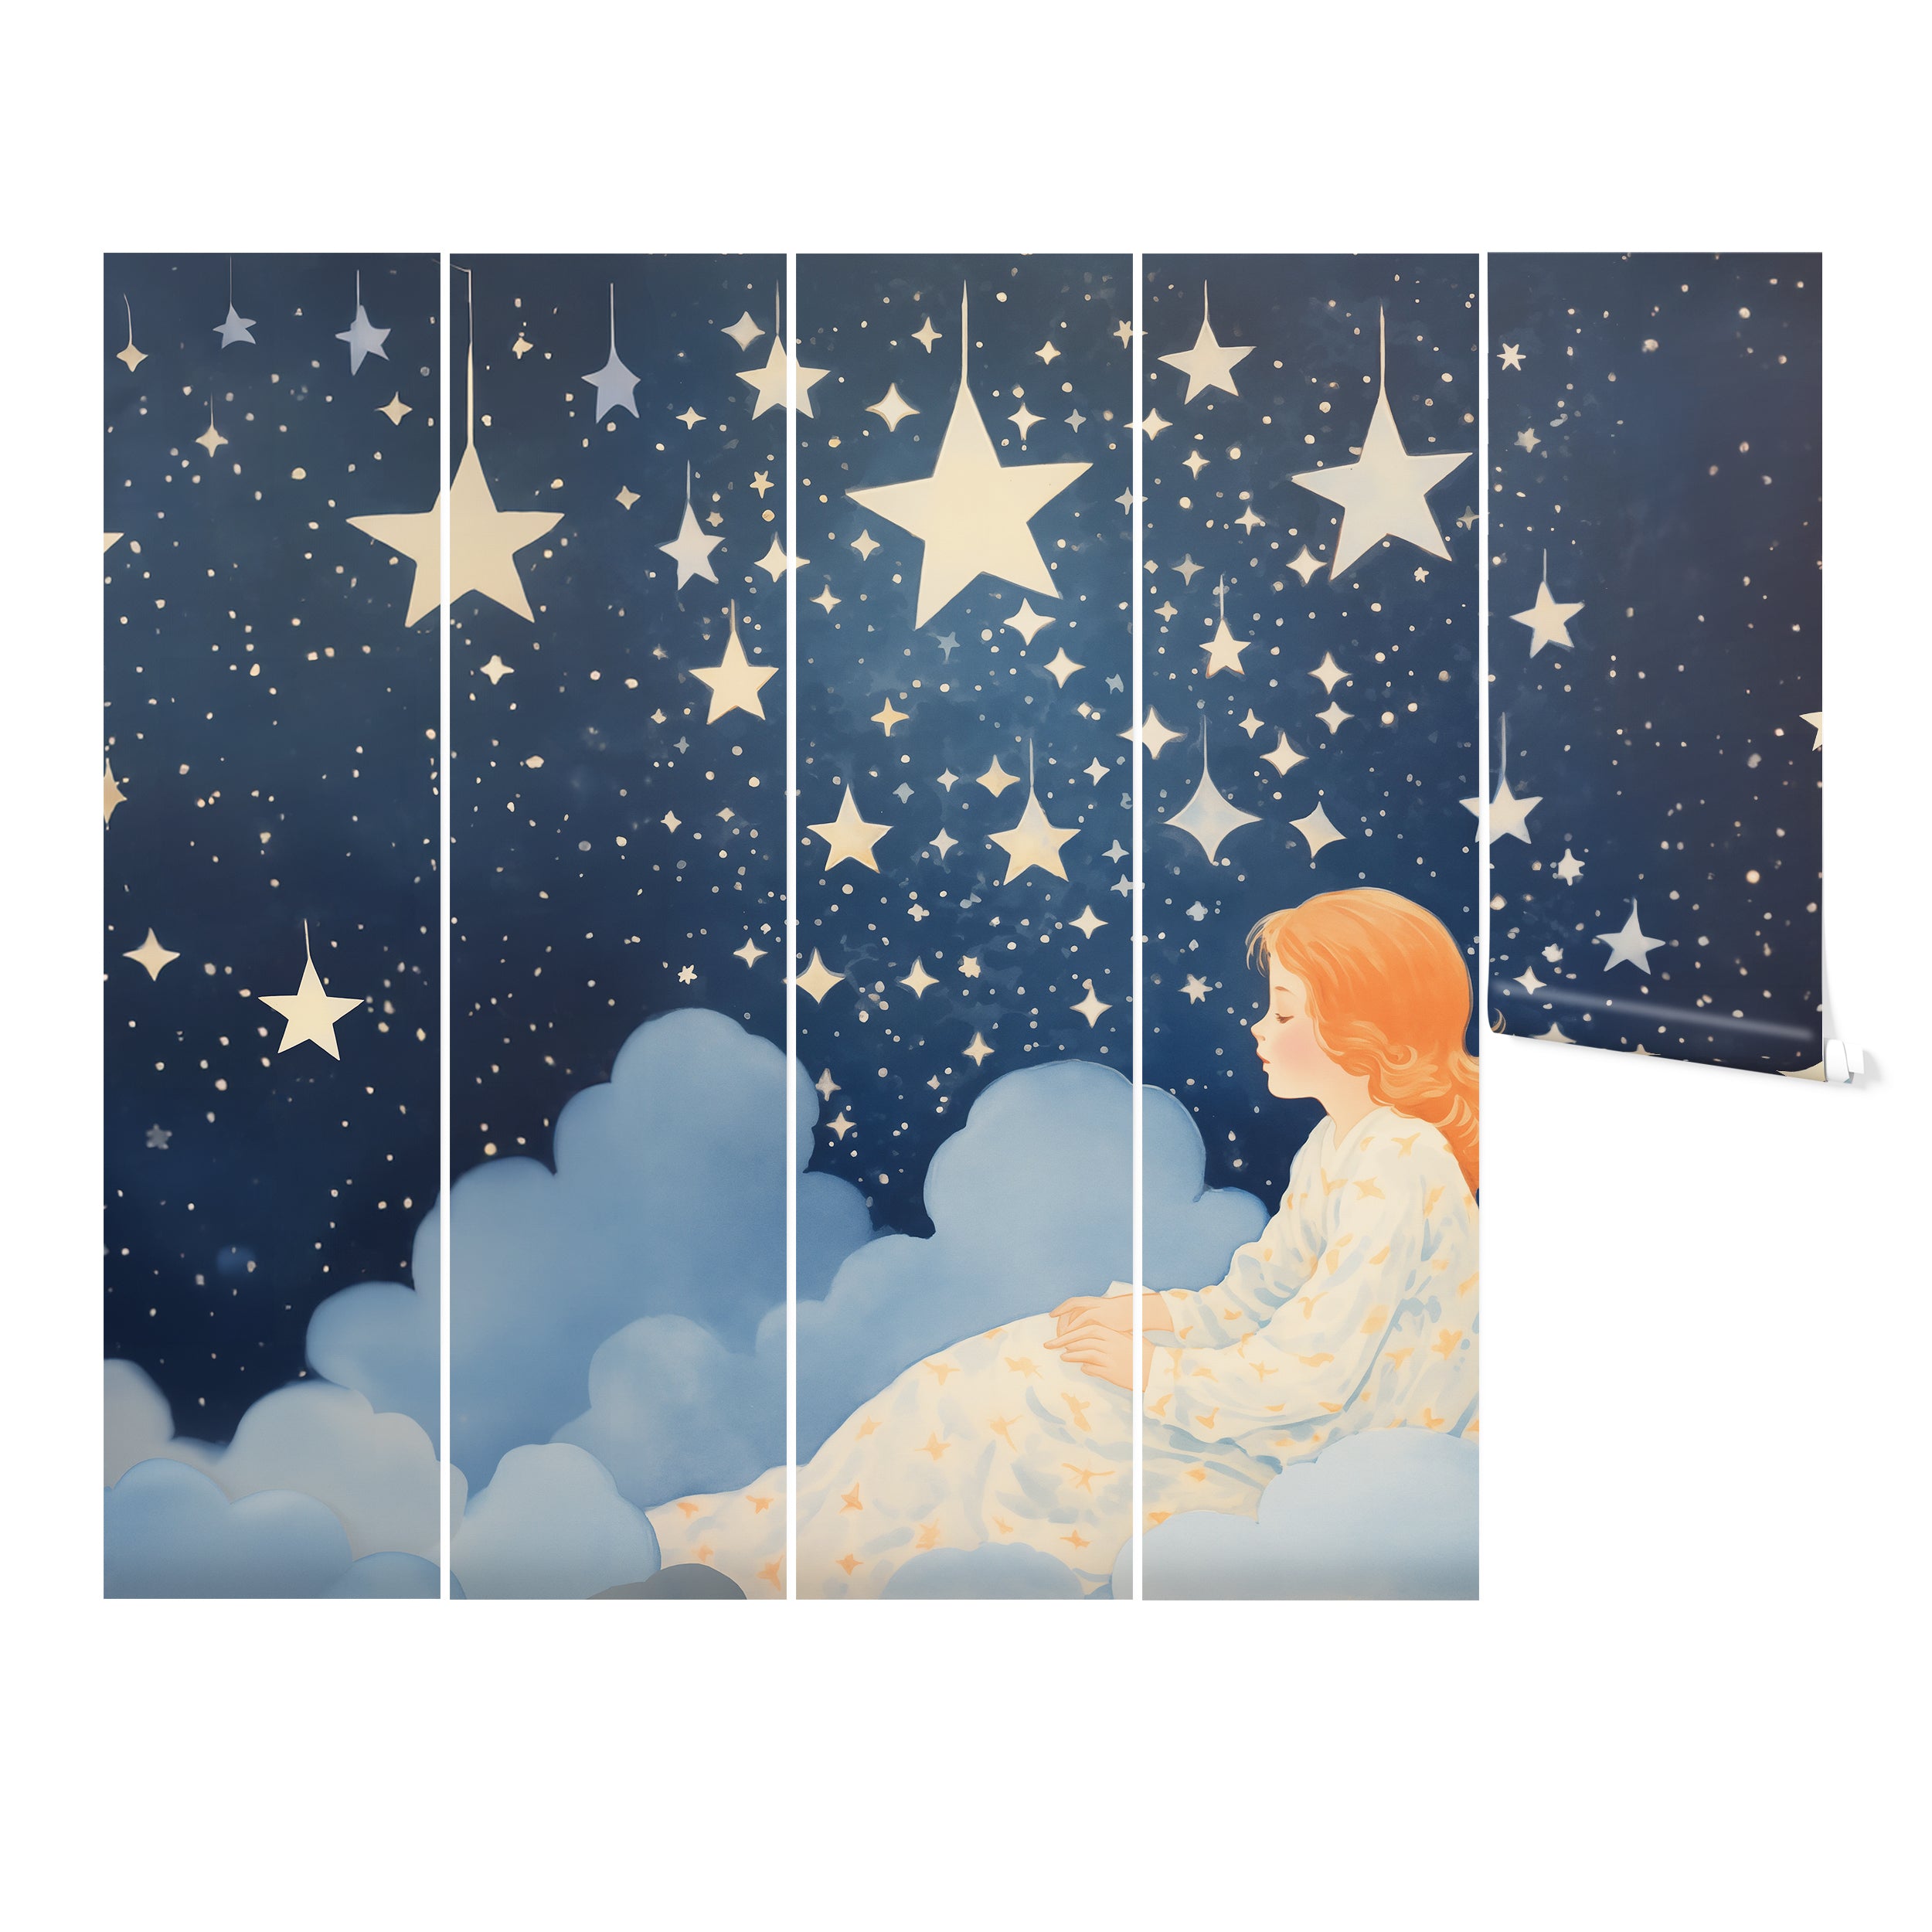 Full view of the 'Sweet Dreams Mural' depicting a young girl amid a star-filled sky and whimsical clouds